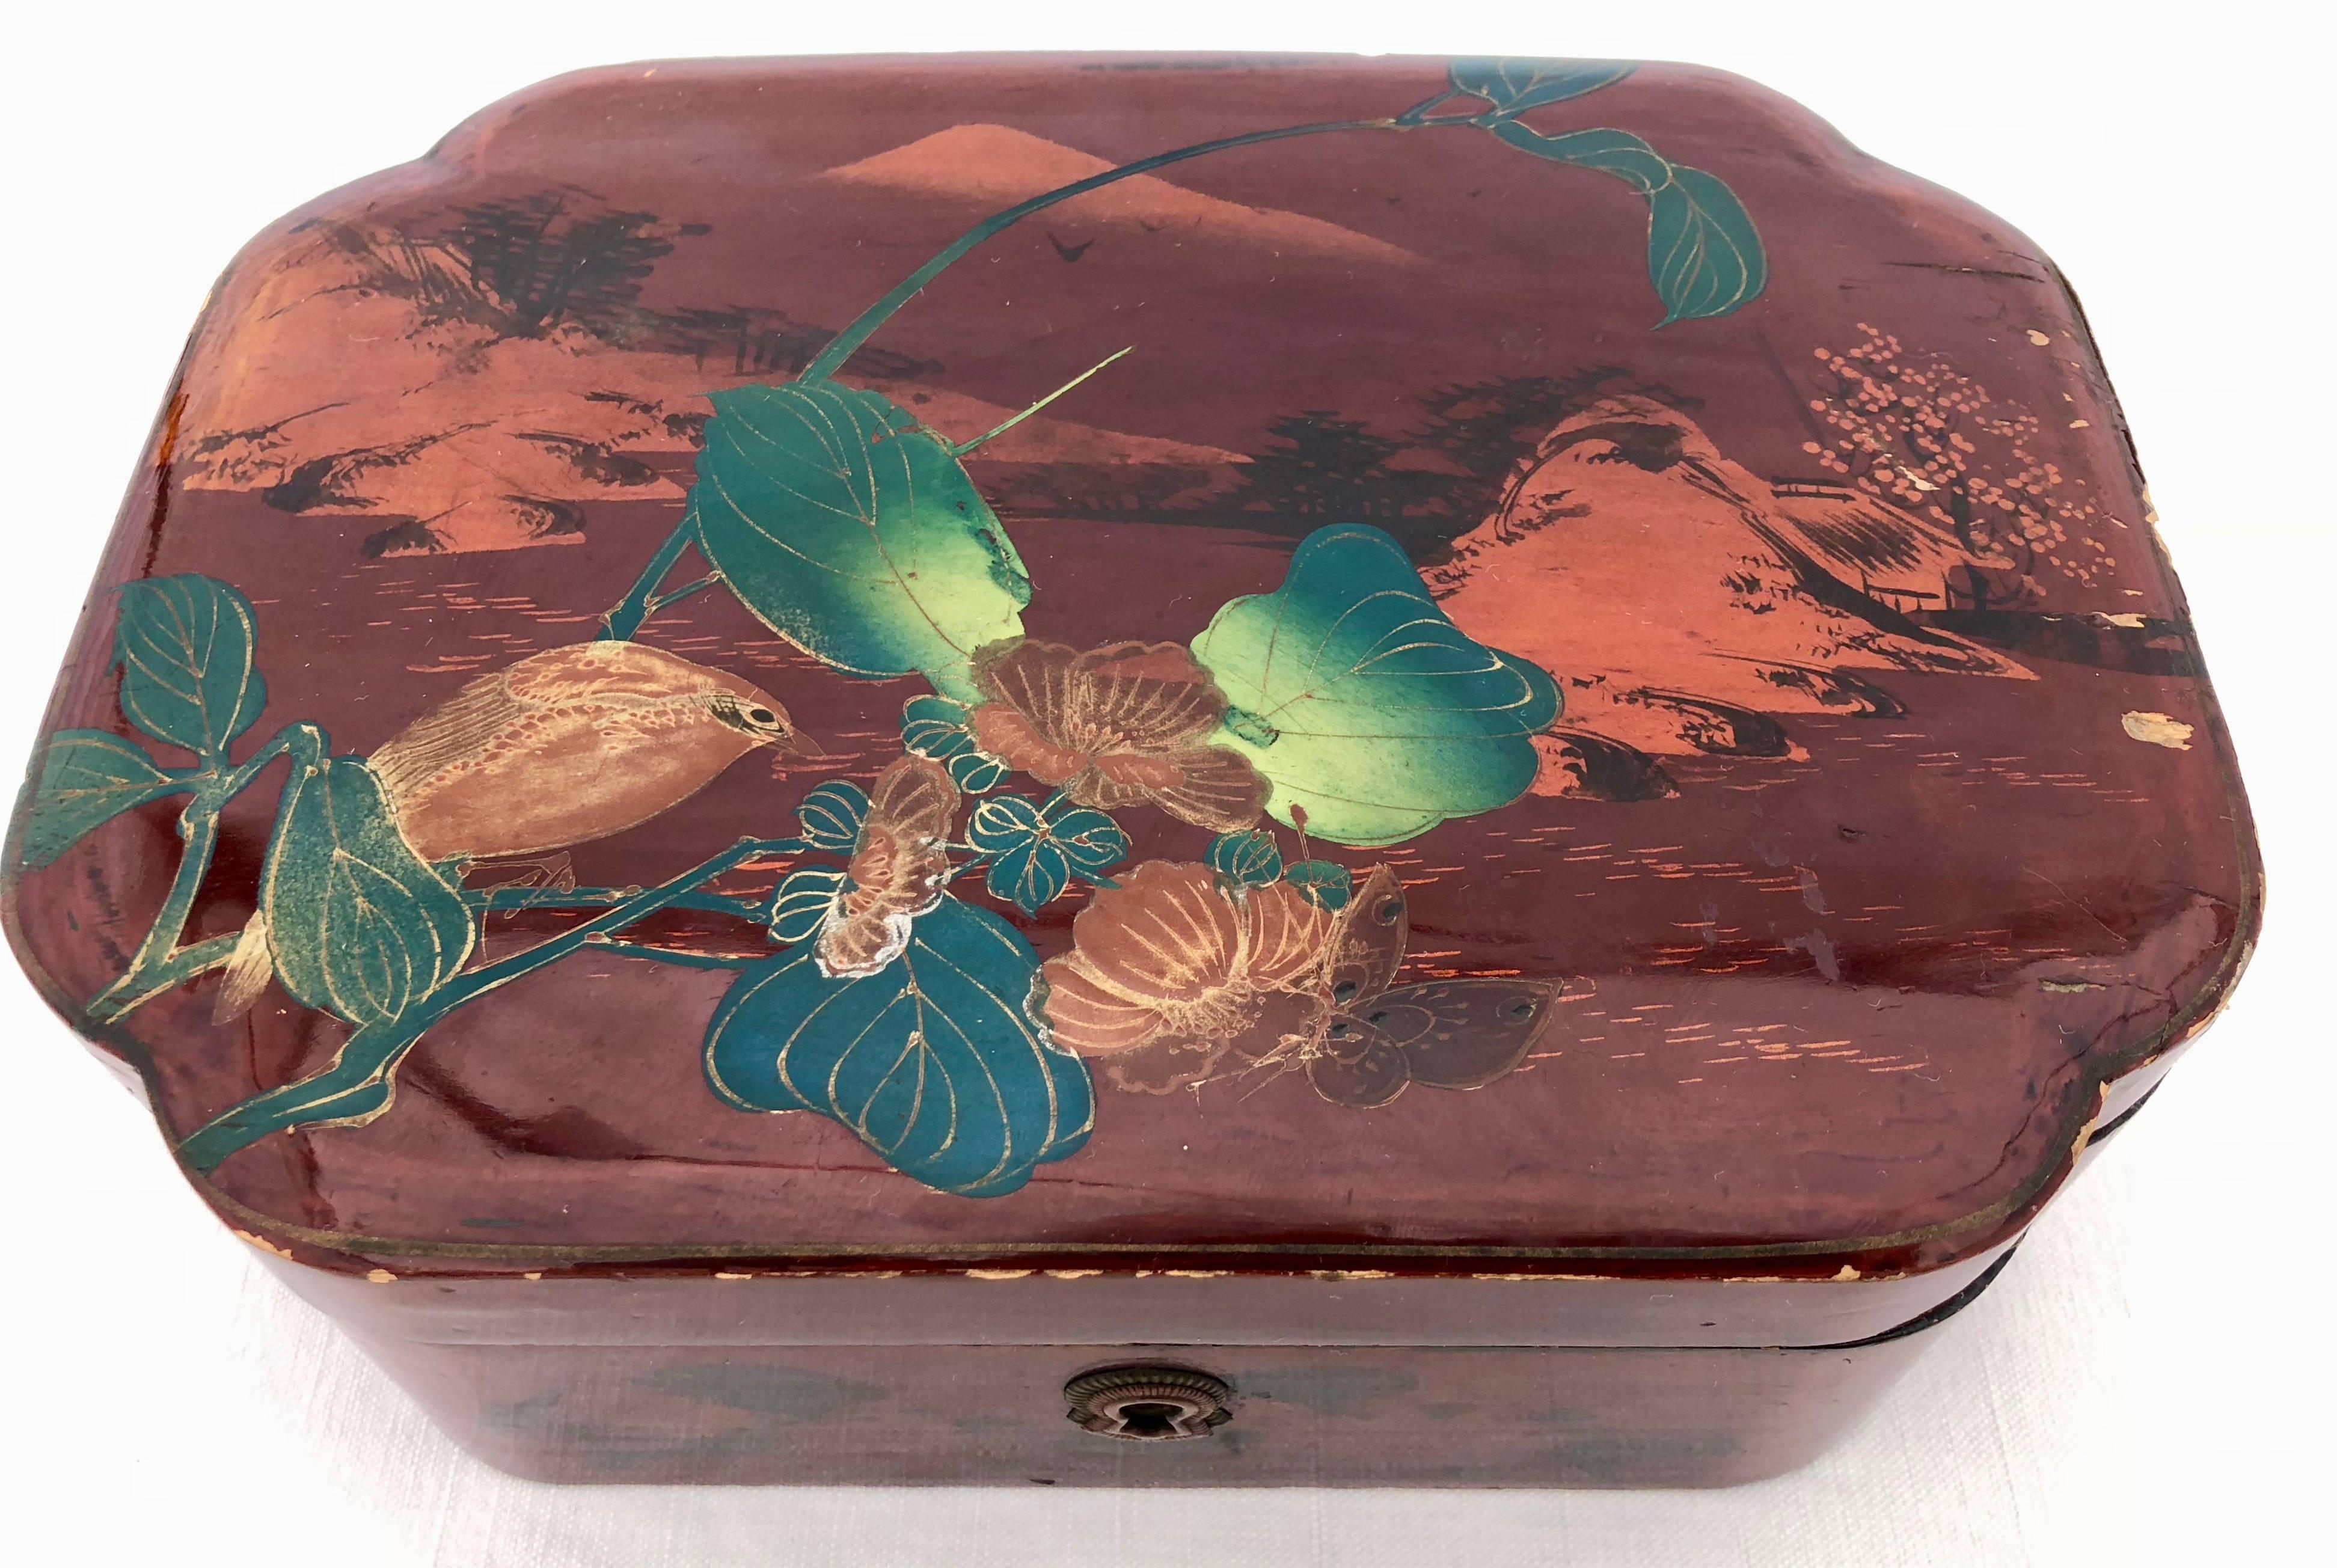 This is a lovely set of three French lacquered boxes in the style of China, which was in keeping with the trend in France during the 1920s. Each box has it's own distinct decoration and colors and are stand alone decorative pieces, but they also